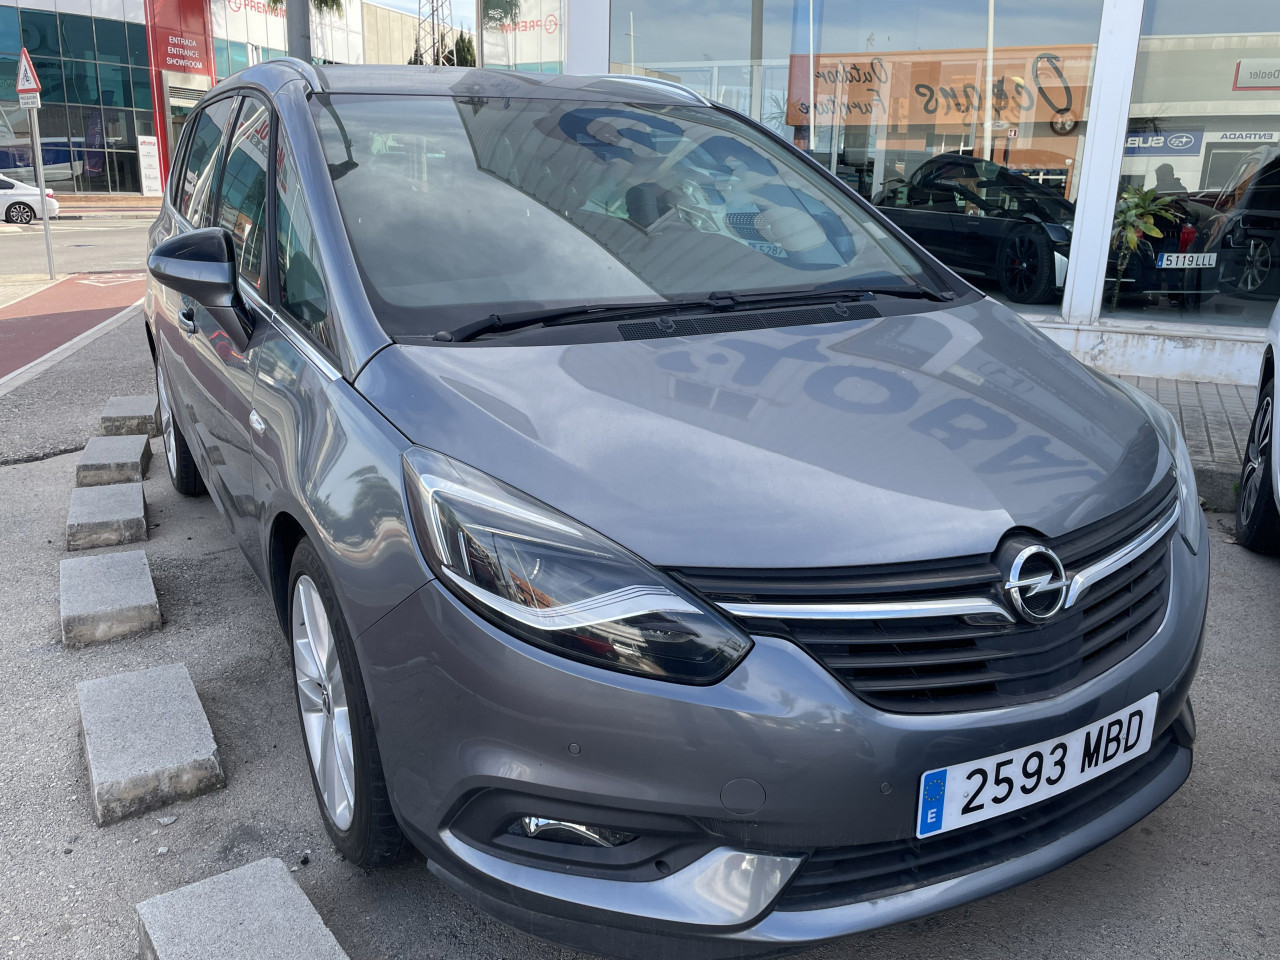 Opel Zafira 2.0 Crdi Touring Automatic People carrier 2019 